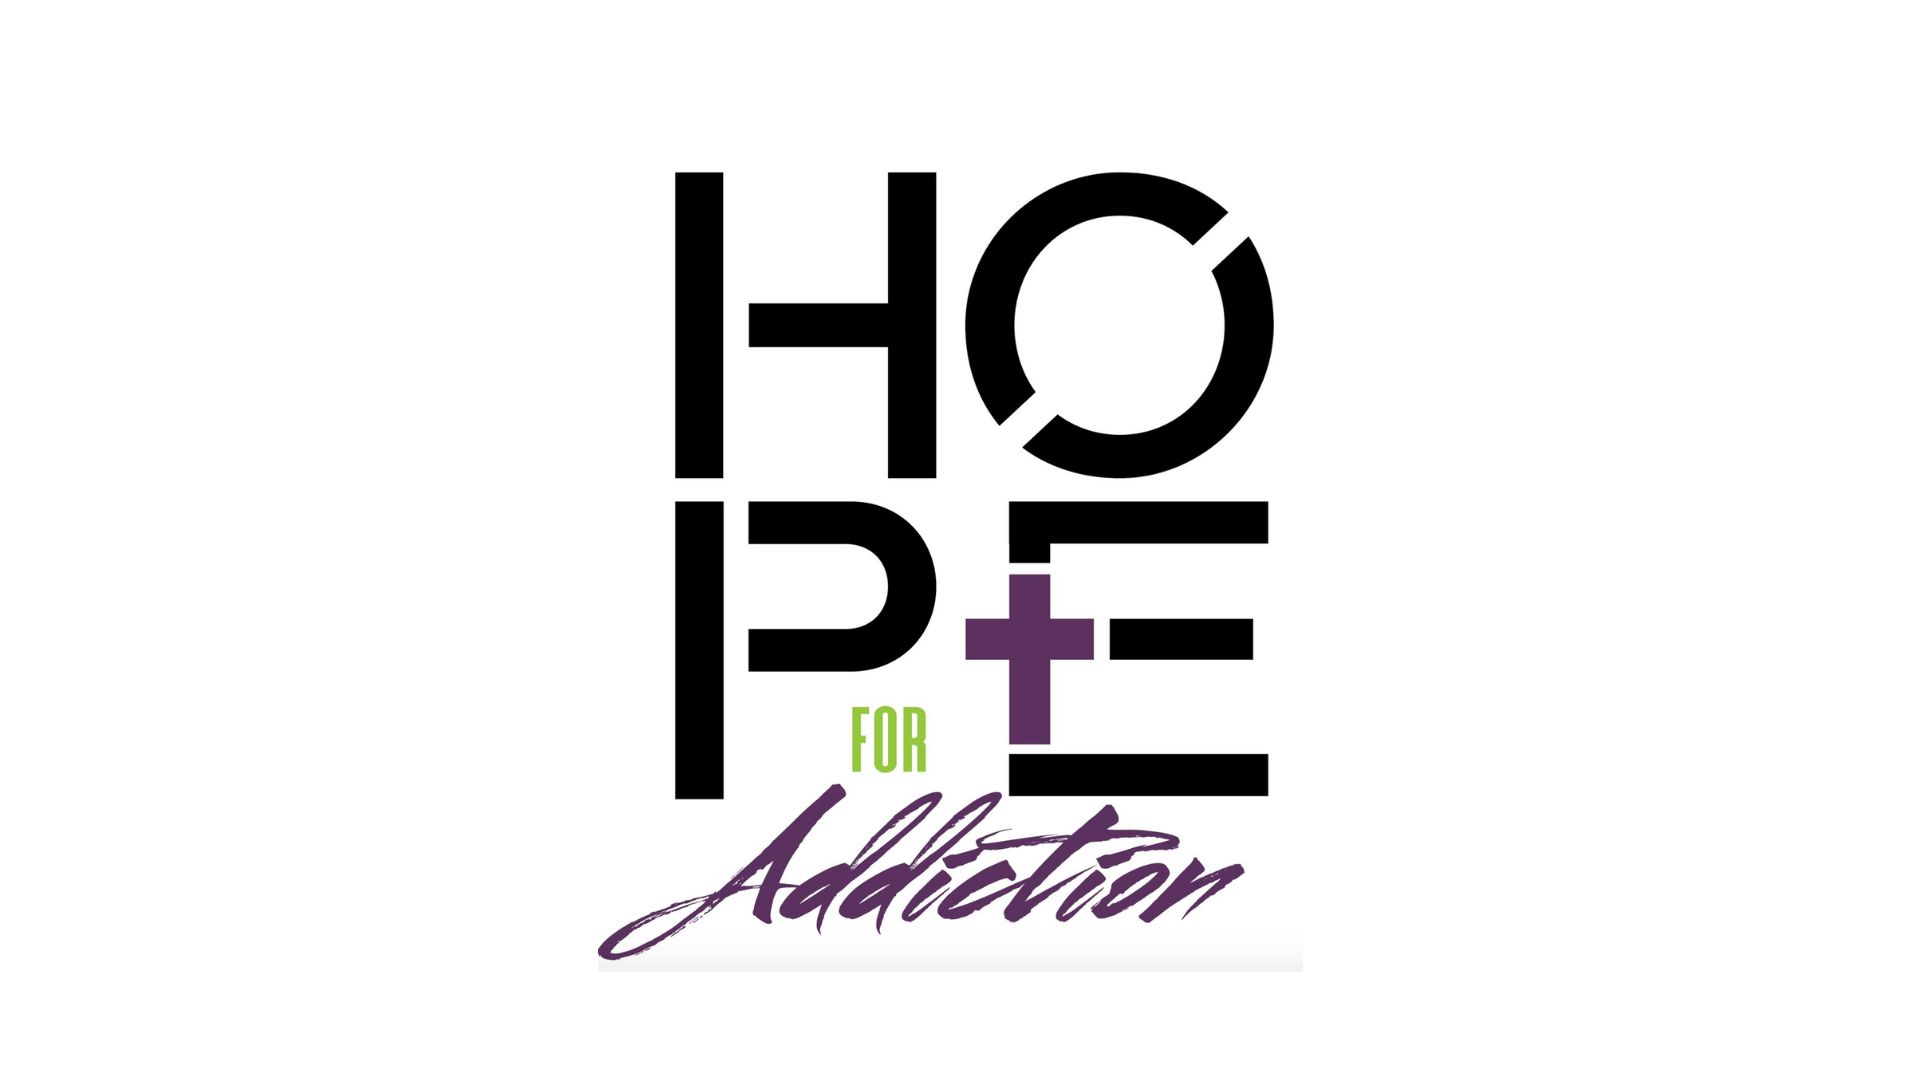 Hope for Additiction